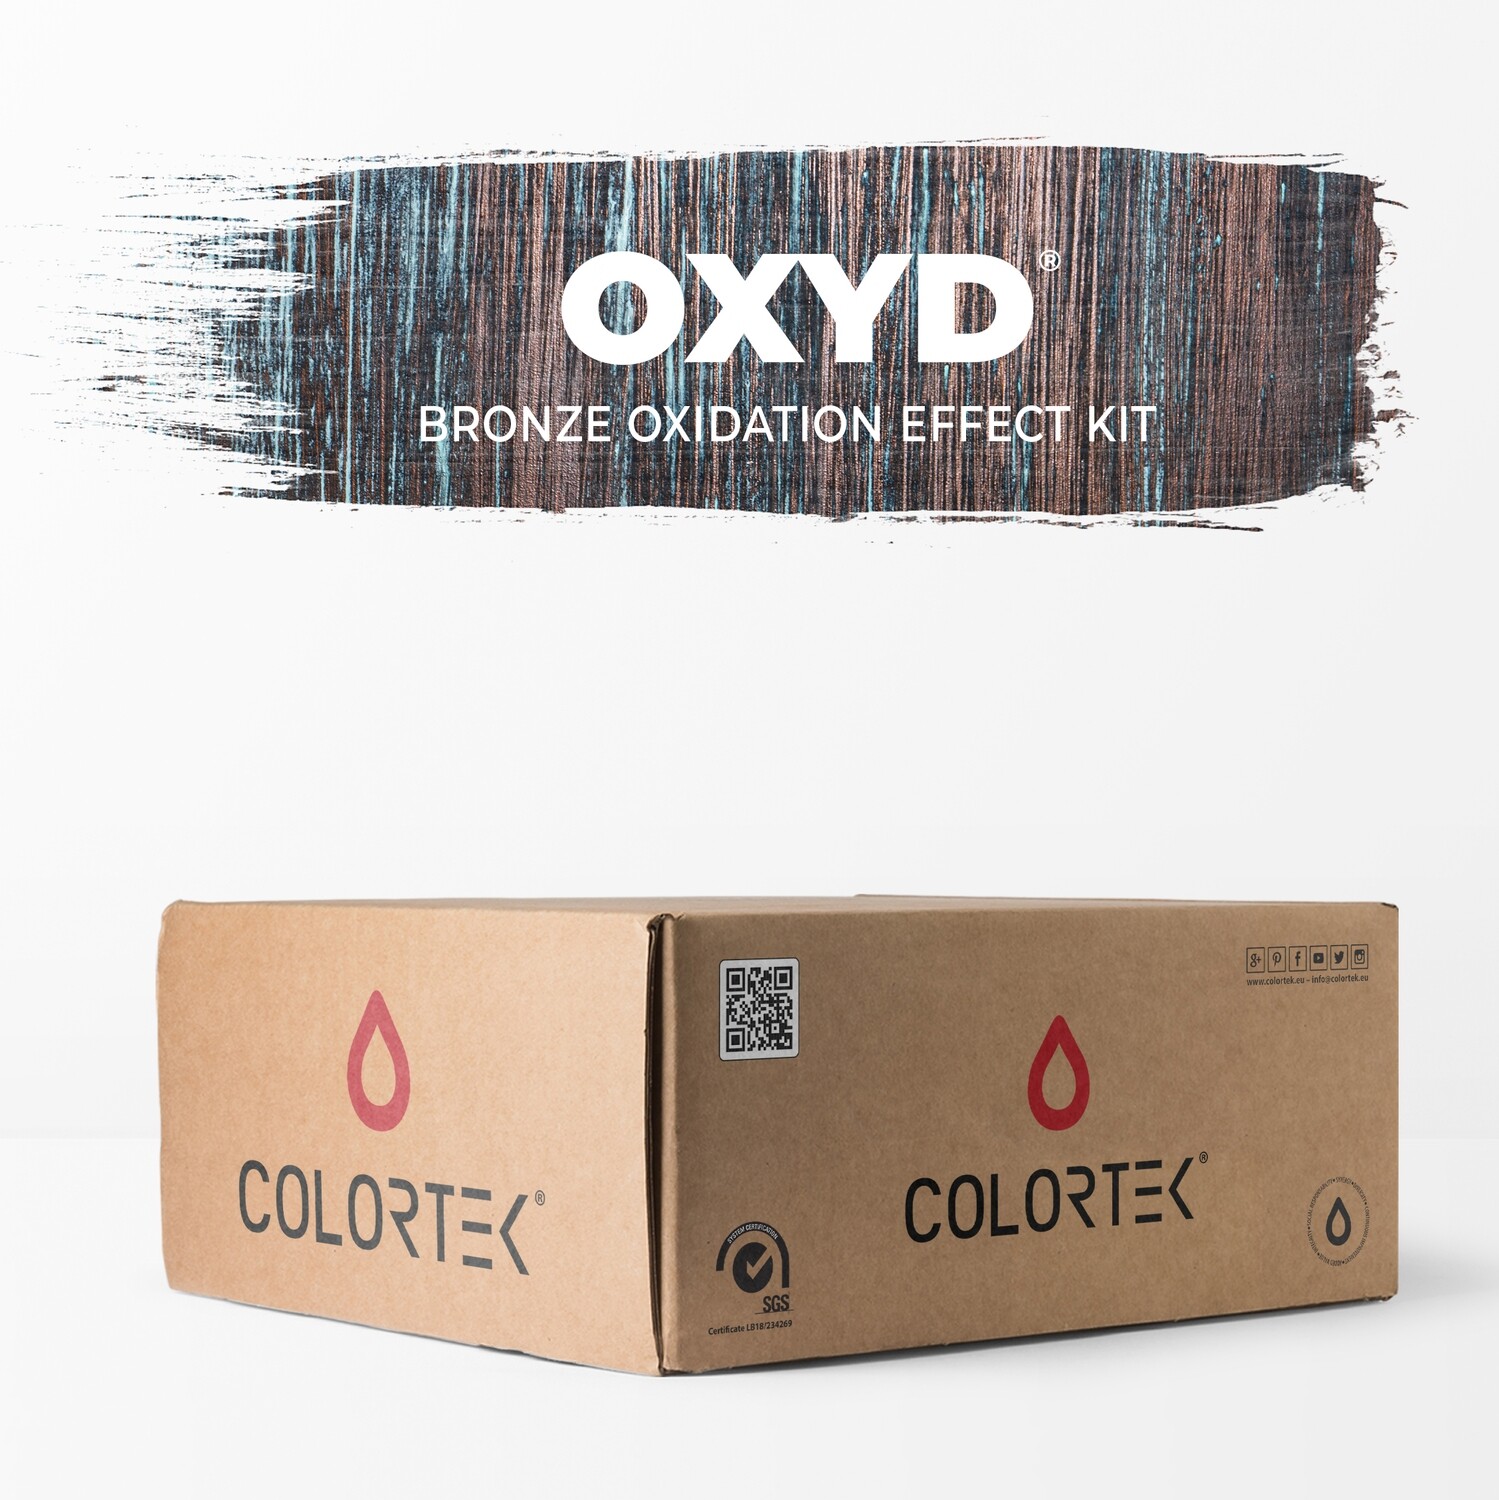 Oxyd - Bronze Oxidation Effect Paint Kit for 5 sqm